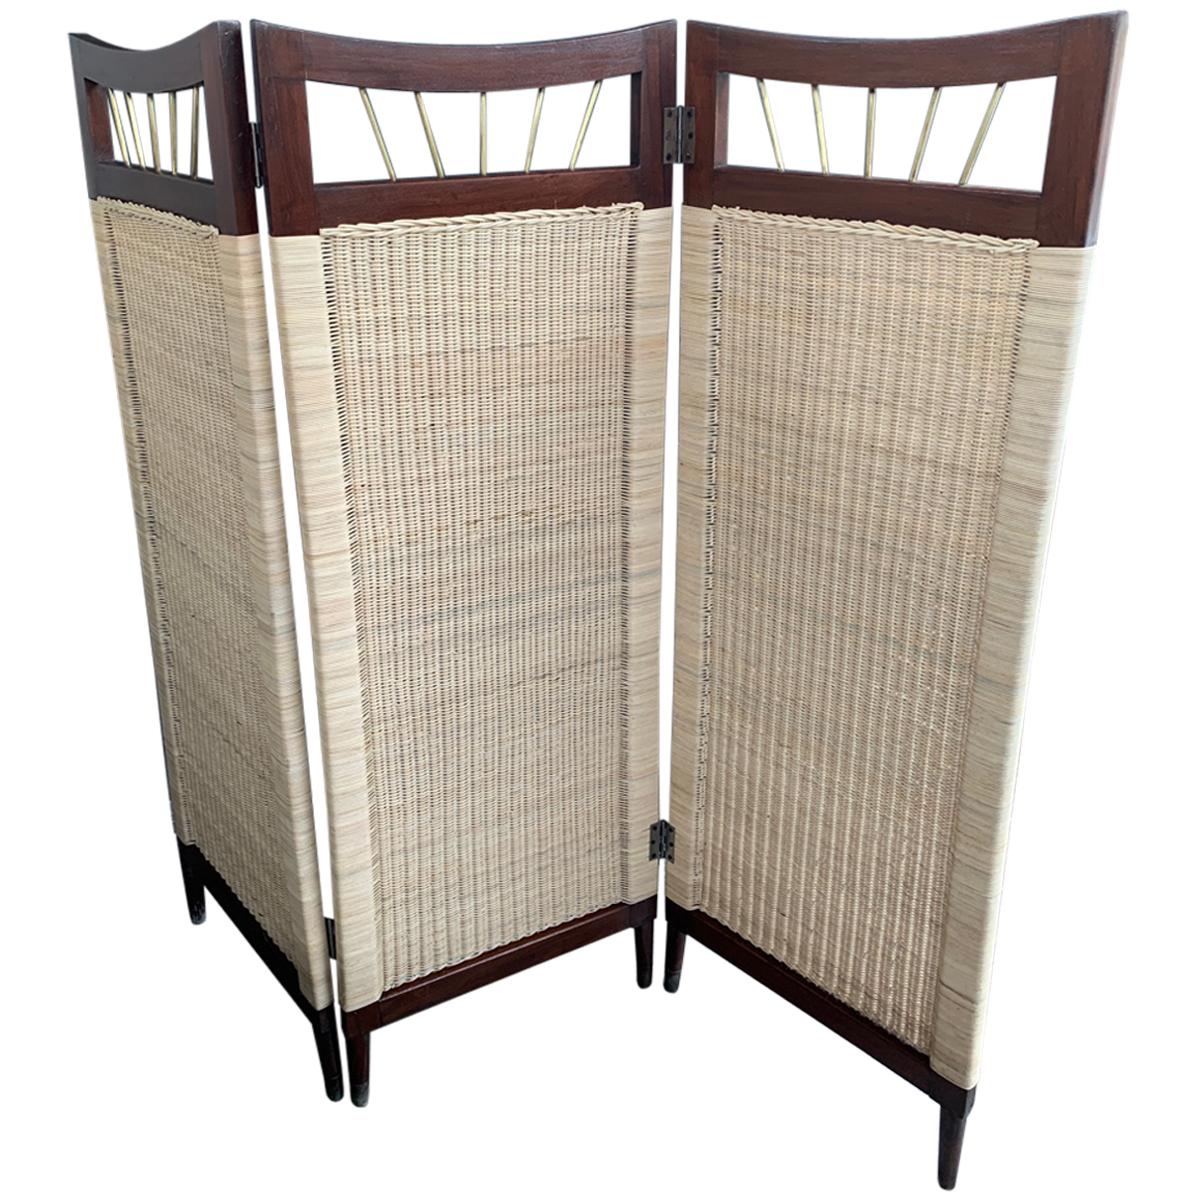 Mid-Century Modern Cane and Wood Screen